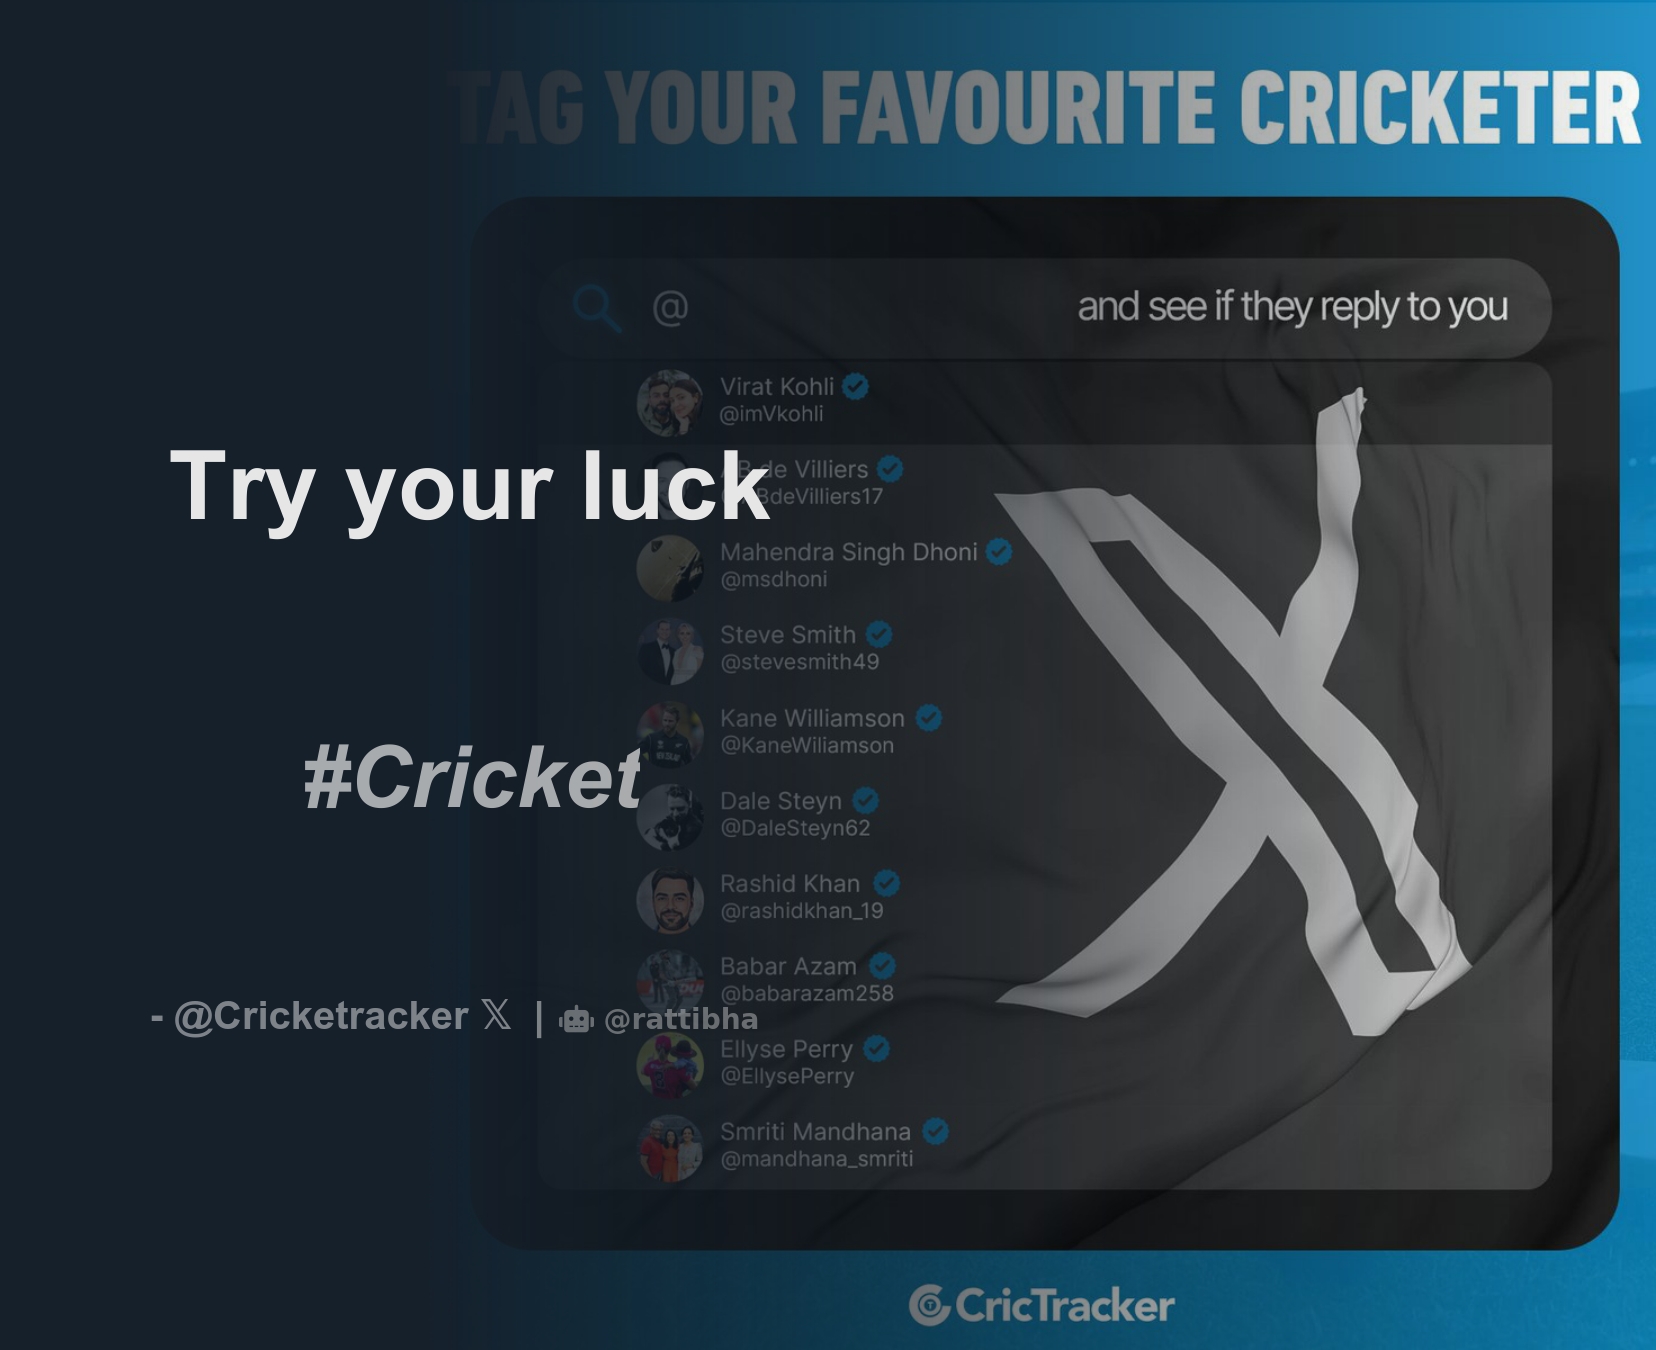 Try your luck #Cricket - Thread from CricTrackerCricketracker